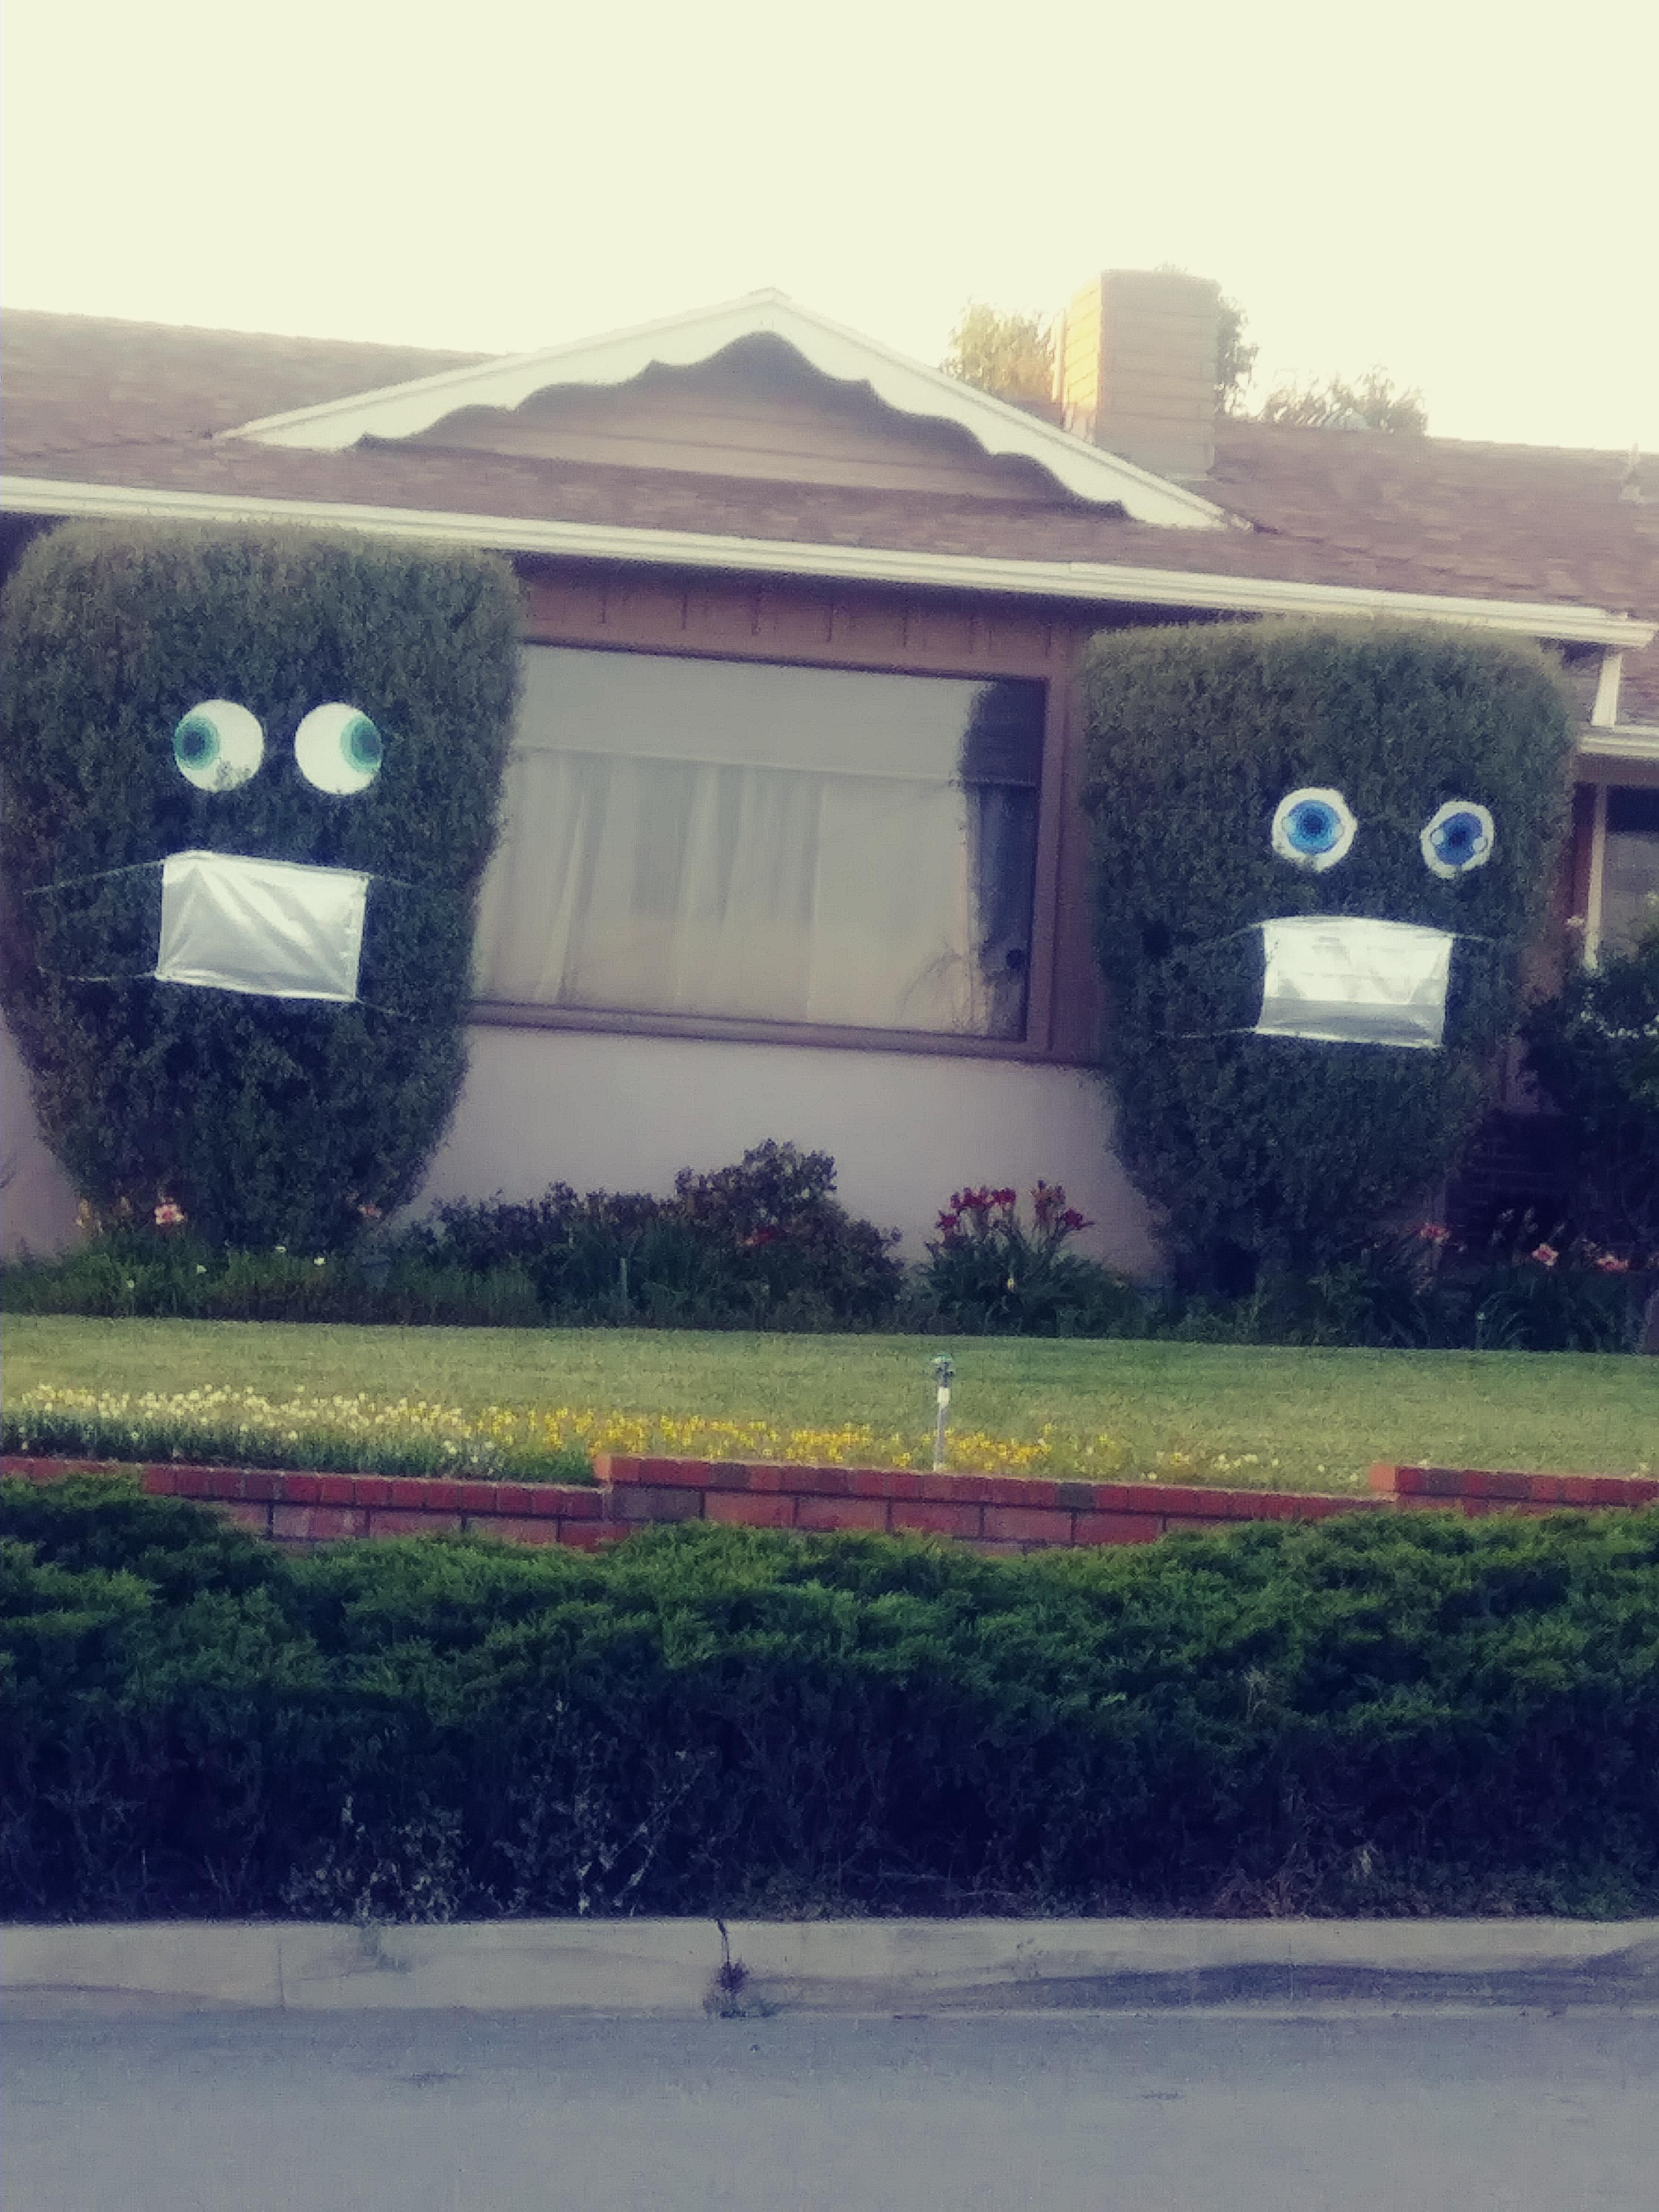 They added silly eyes to the bushes now.